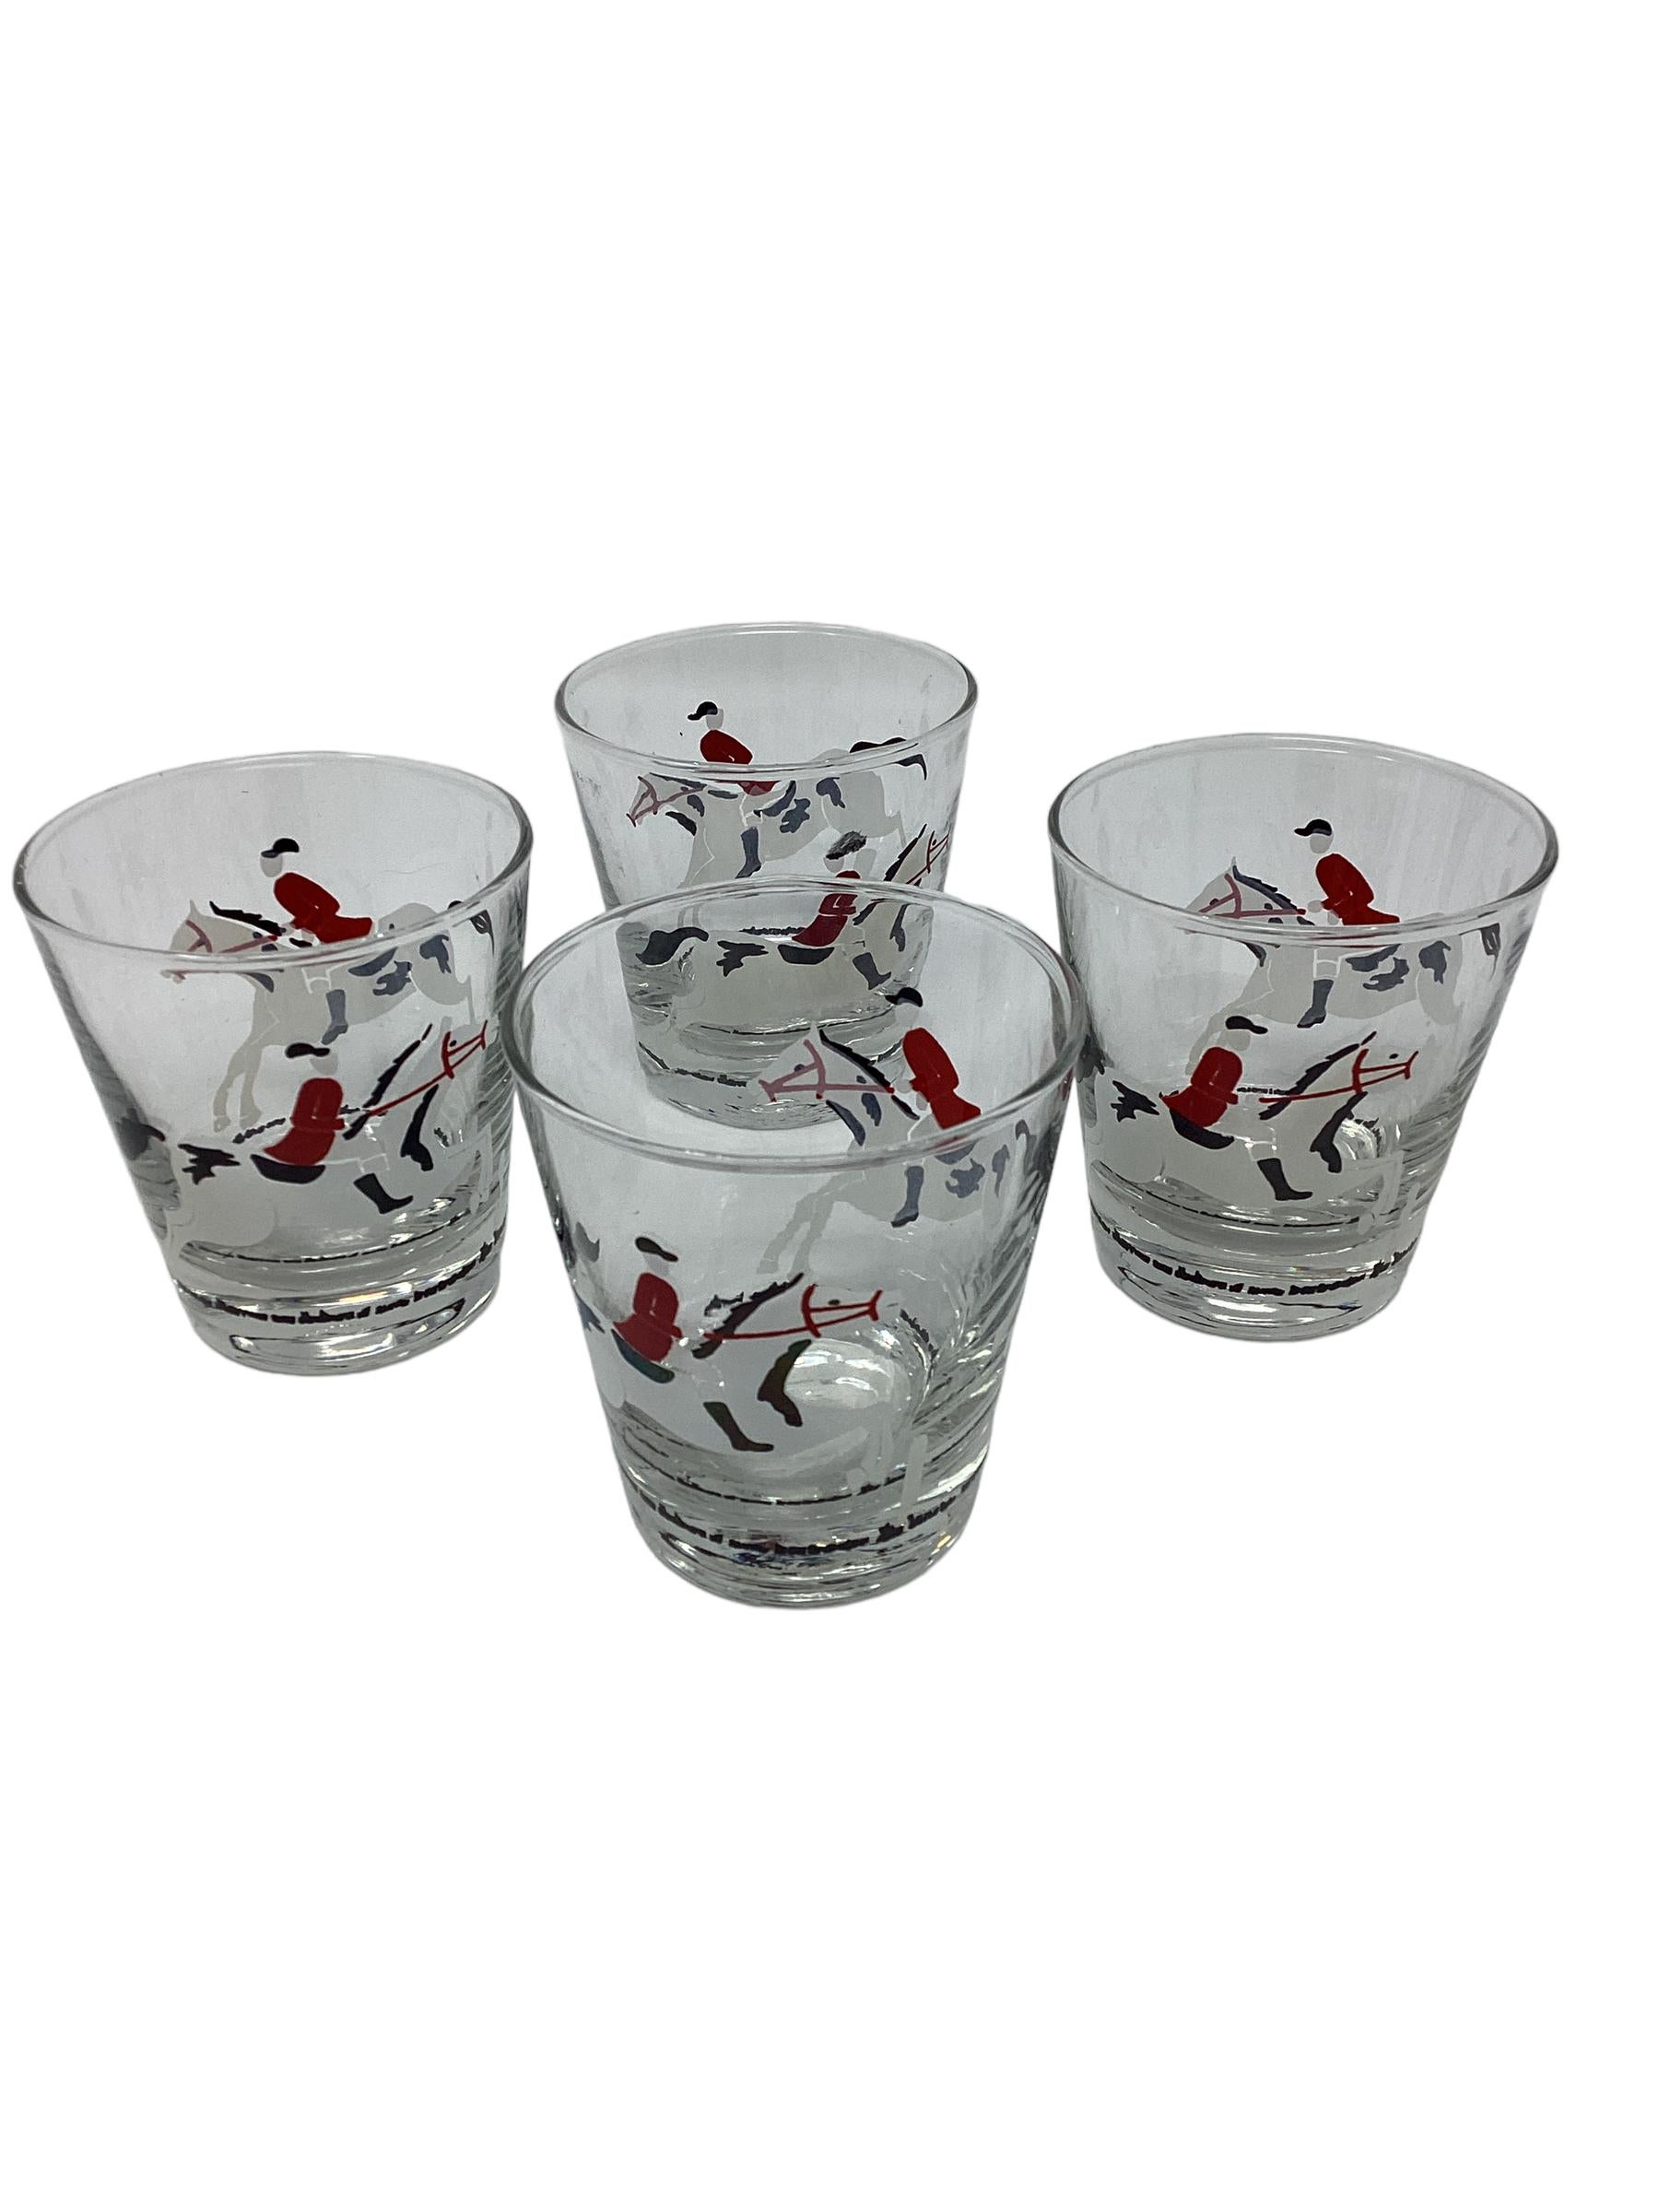 Set of 4 Vintage Libbey Equestrian Old Fashioned Glasses. Each glass decorated with two riders mid jump dressed in red and white outfits. There are two sets of four available.